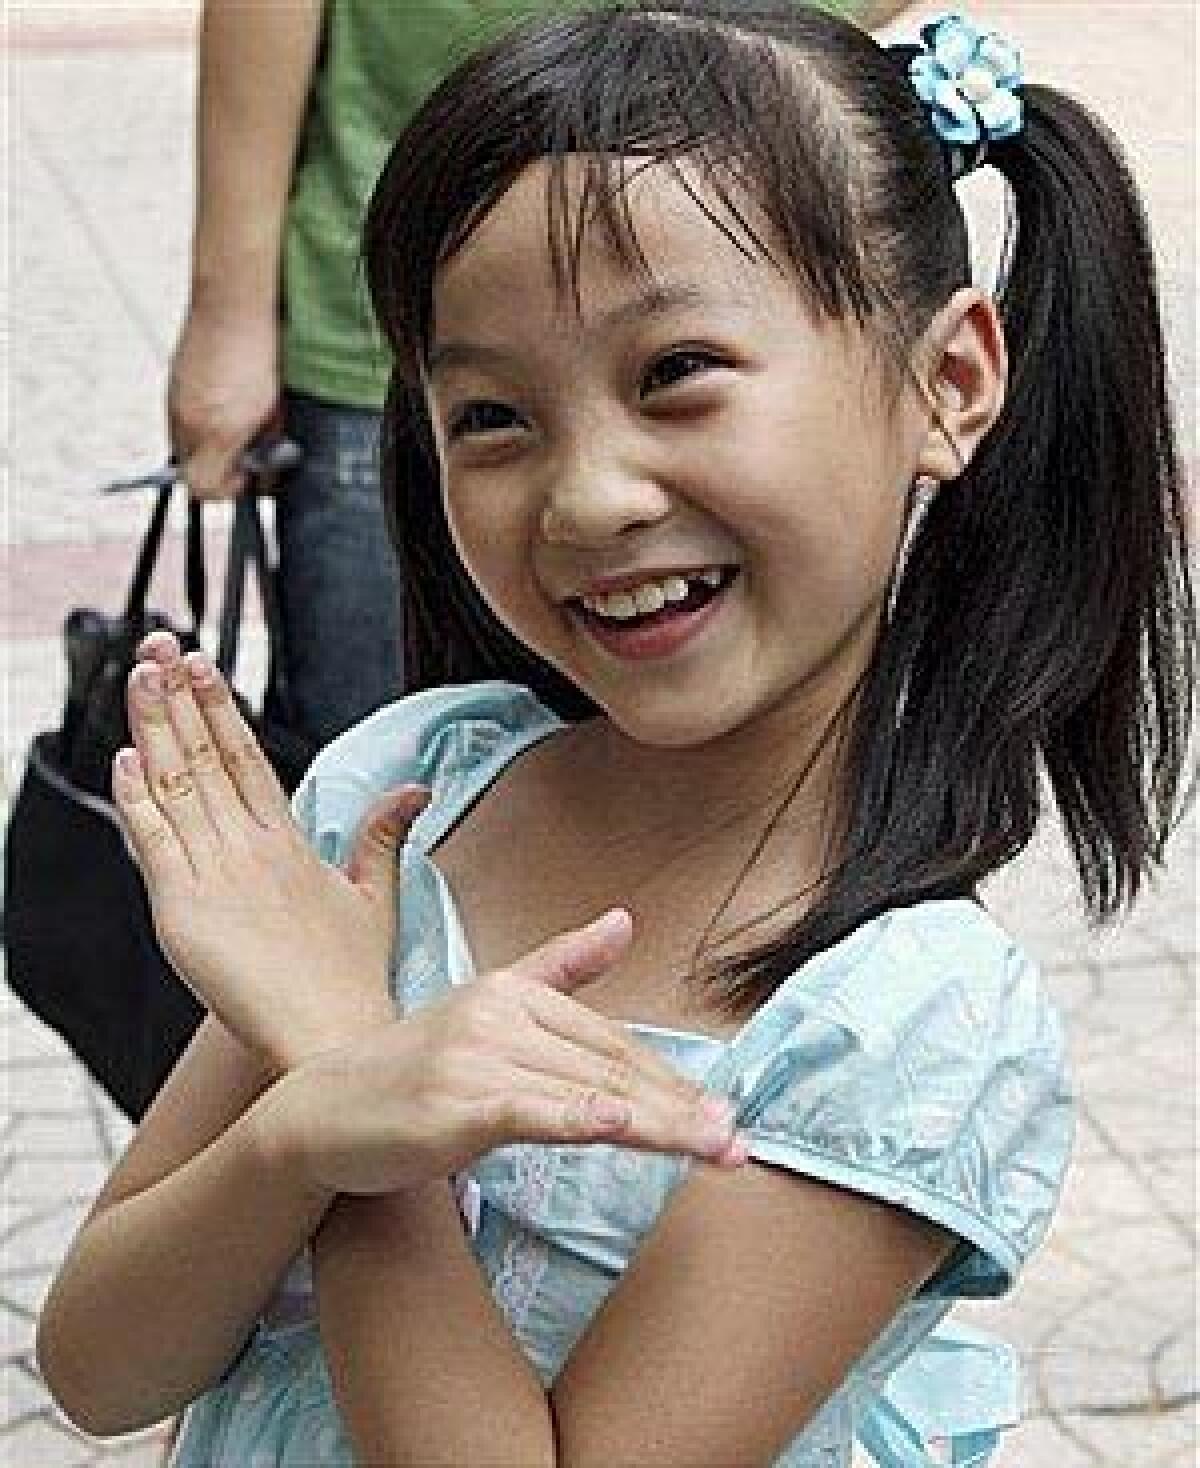 This photo released by China's Xinhua News Agency shows Lin Miaoke, a nine-year-old Chinese girl who performed at the opening ceremony of the Beijing Olympics. A 7-year-old Chinese girl's face was "not suitable" for the Olympics opening ceremony, so Lin lip-synched "Ode to the Motherland."